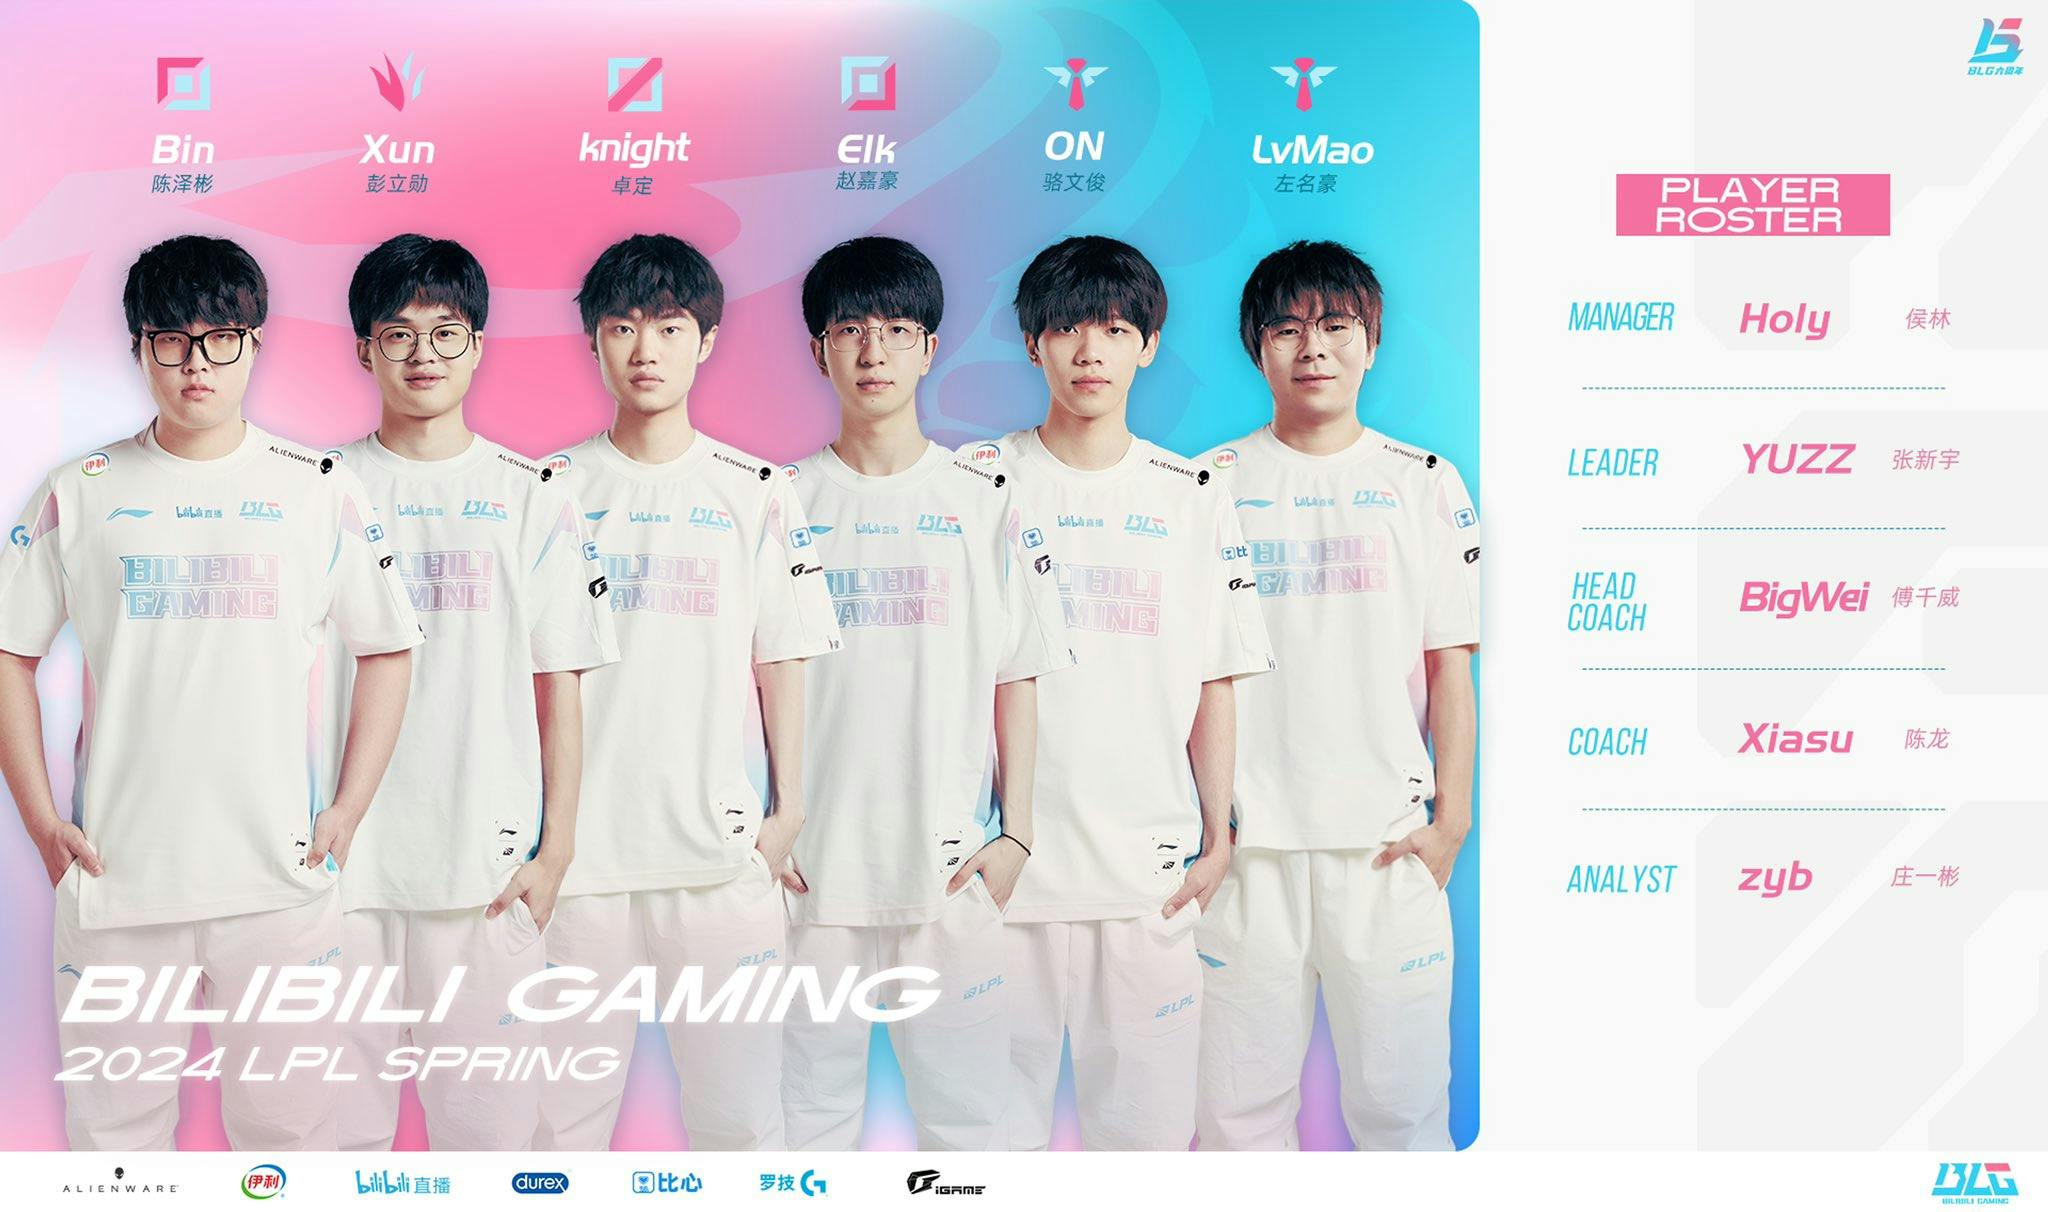 Bilibili Gaming are one of the 17 teams competing in LPL Spring 2024.